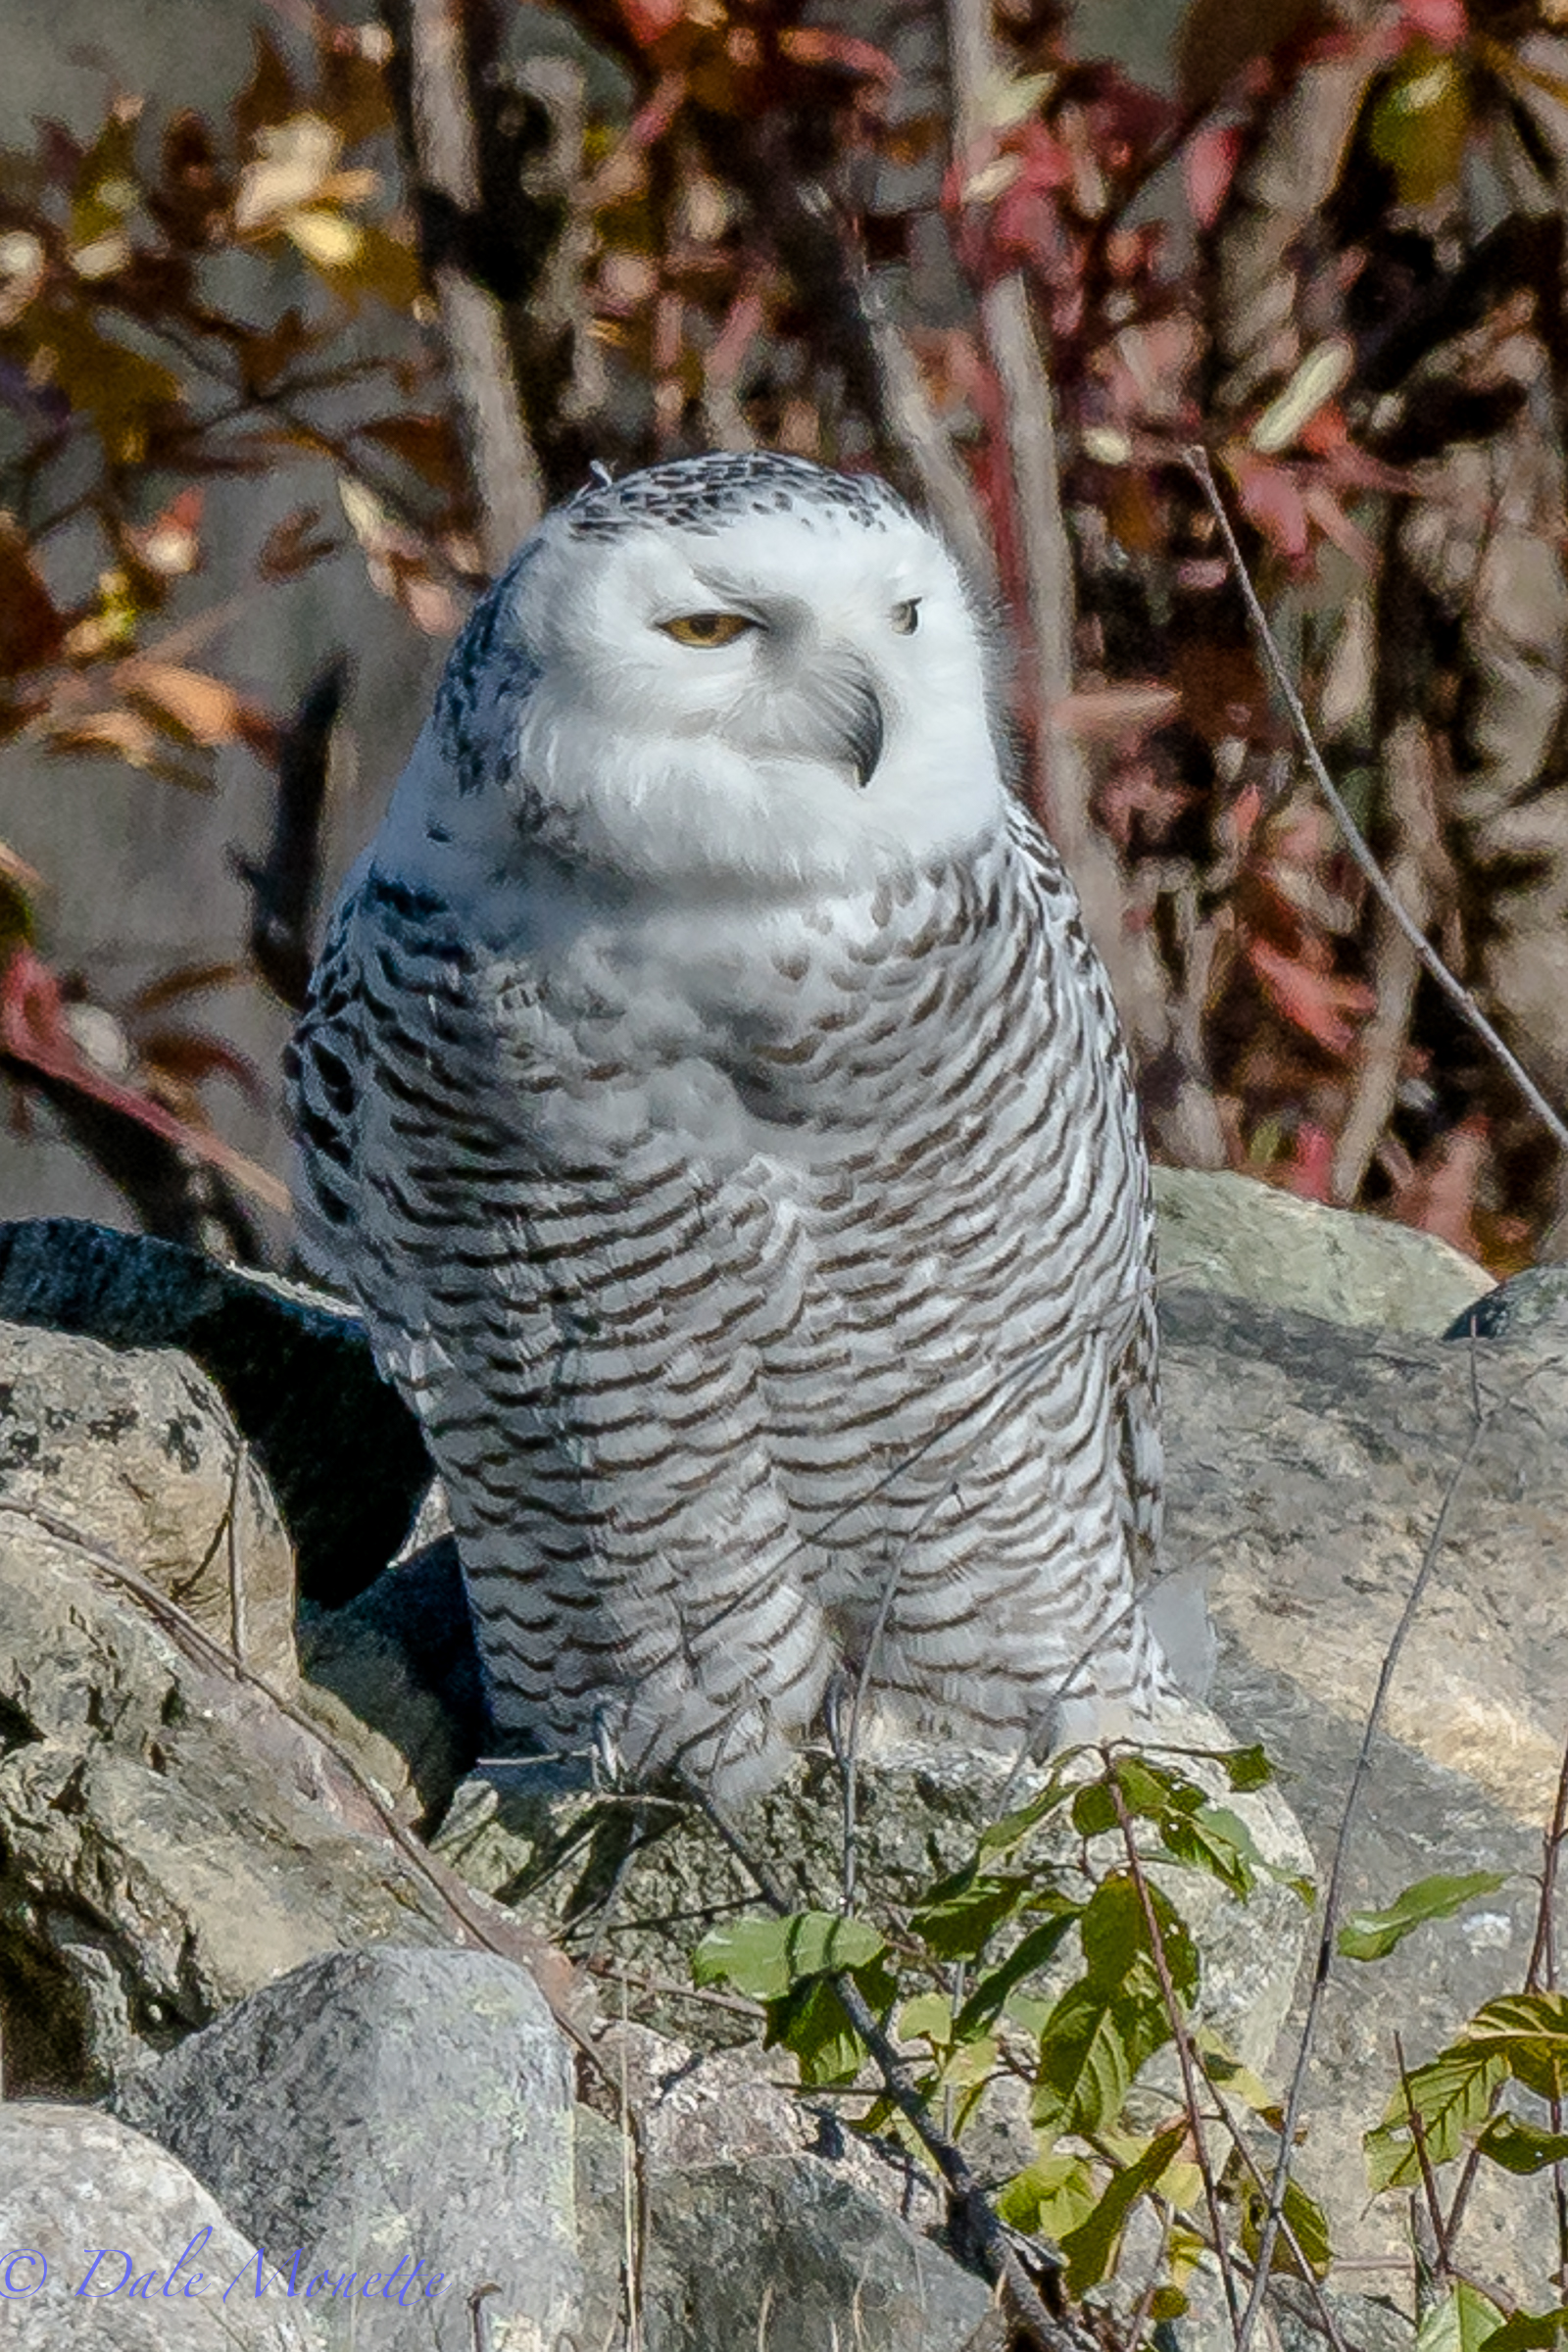   Im sad to report that this snowy owl is now is in a raptor rehab facility. The owl was not feeding ,was captured and has been hospitalized until she can be released again.&nbsp; She also had a foot injury and a sprained wing muscle. Lets hope withi